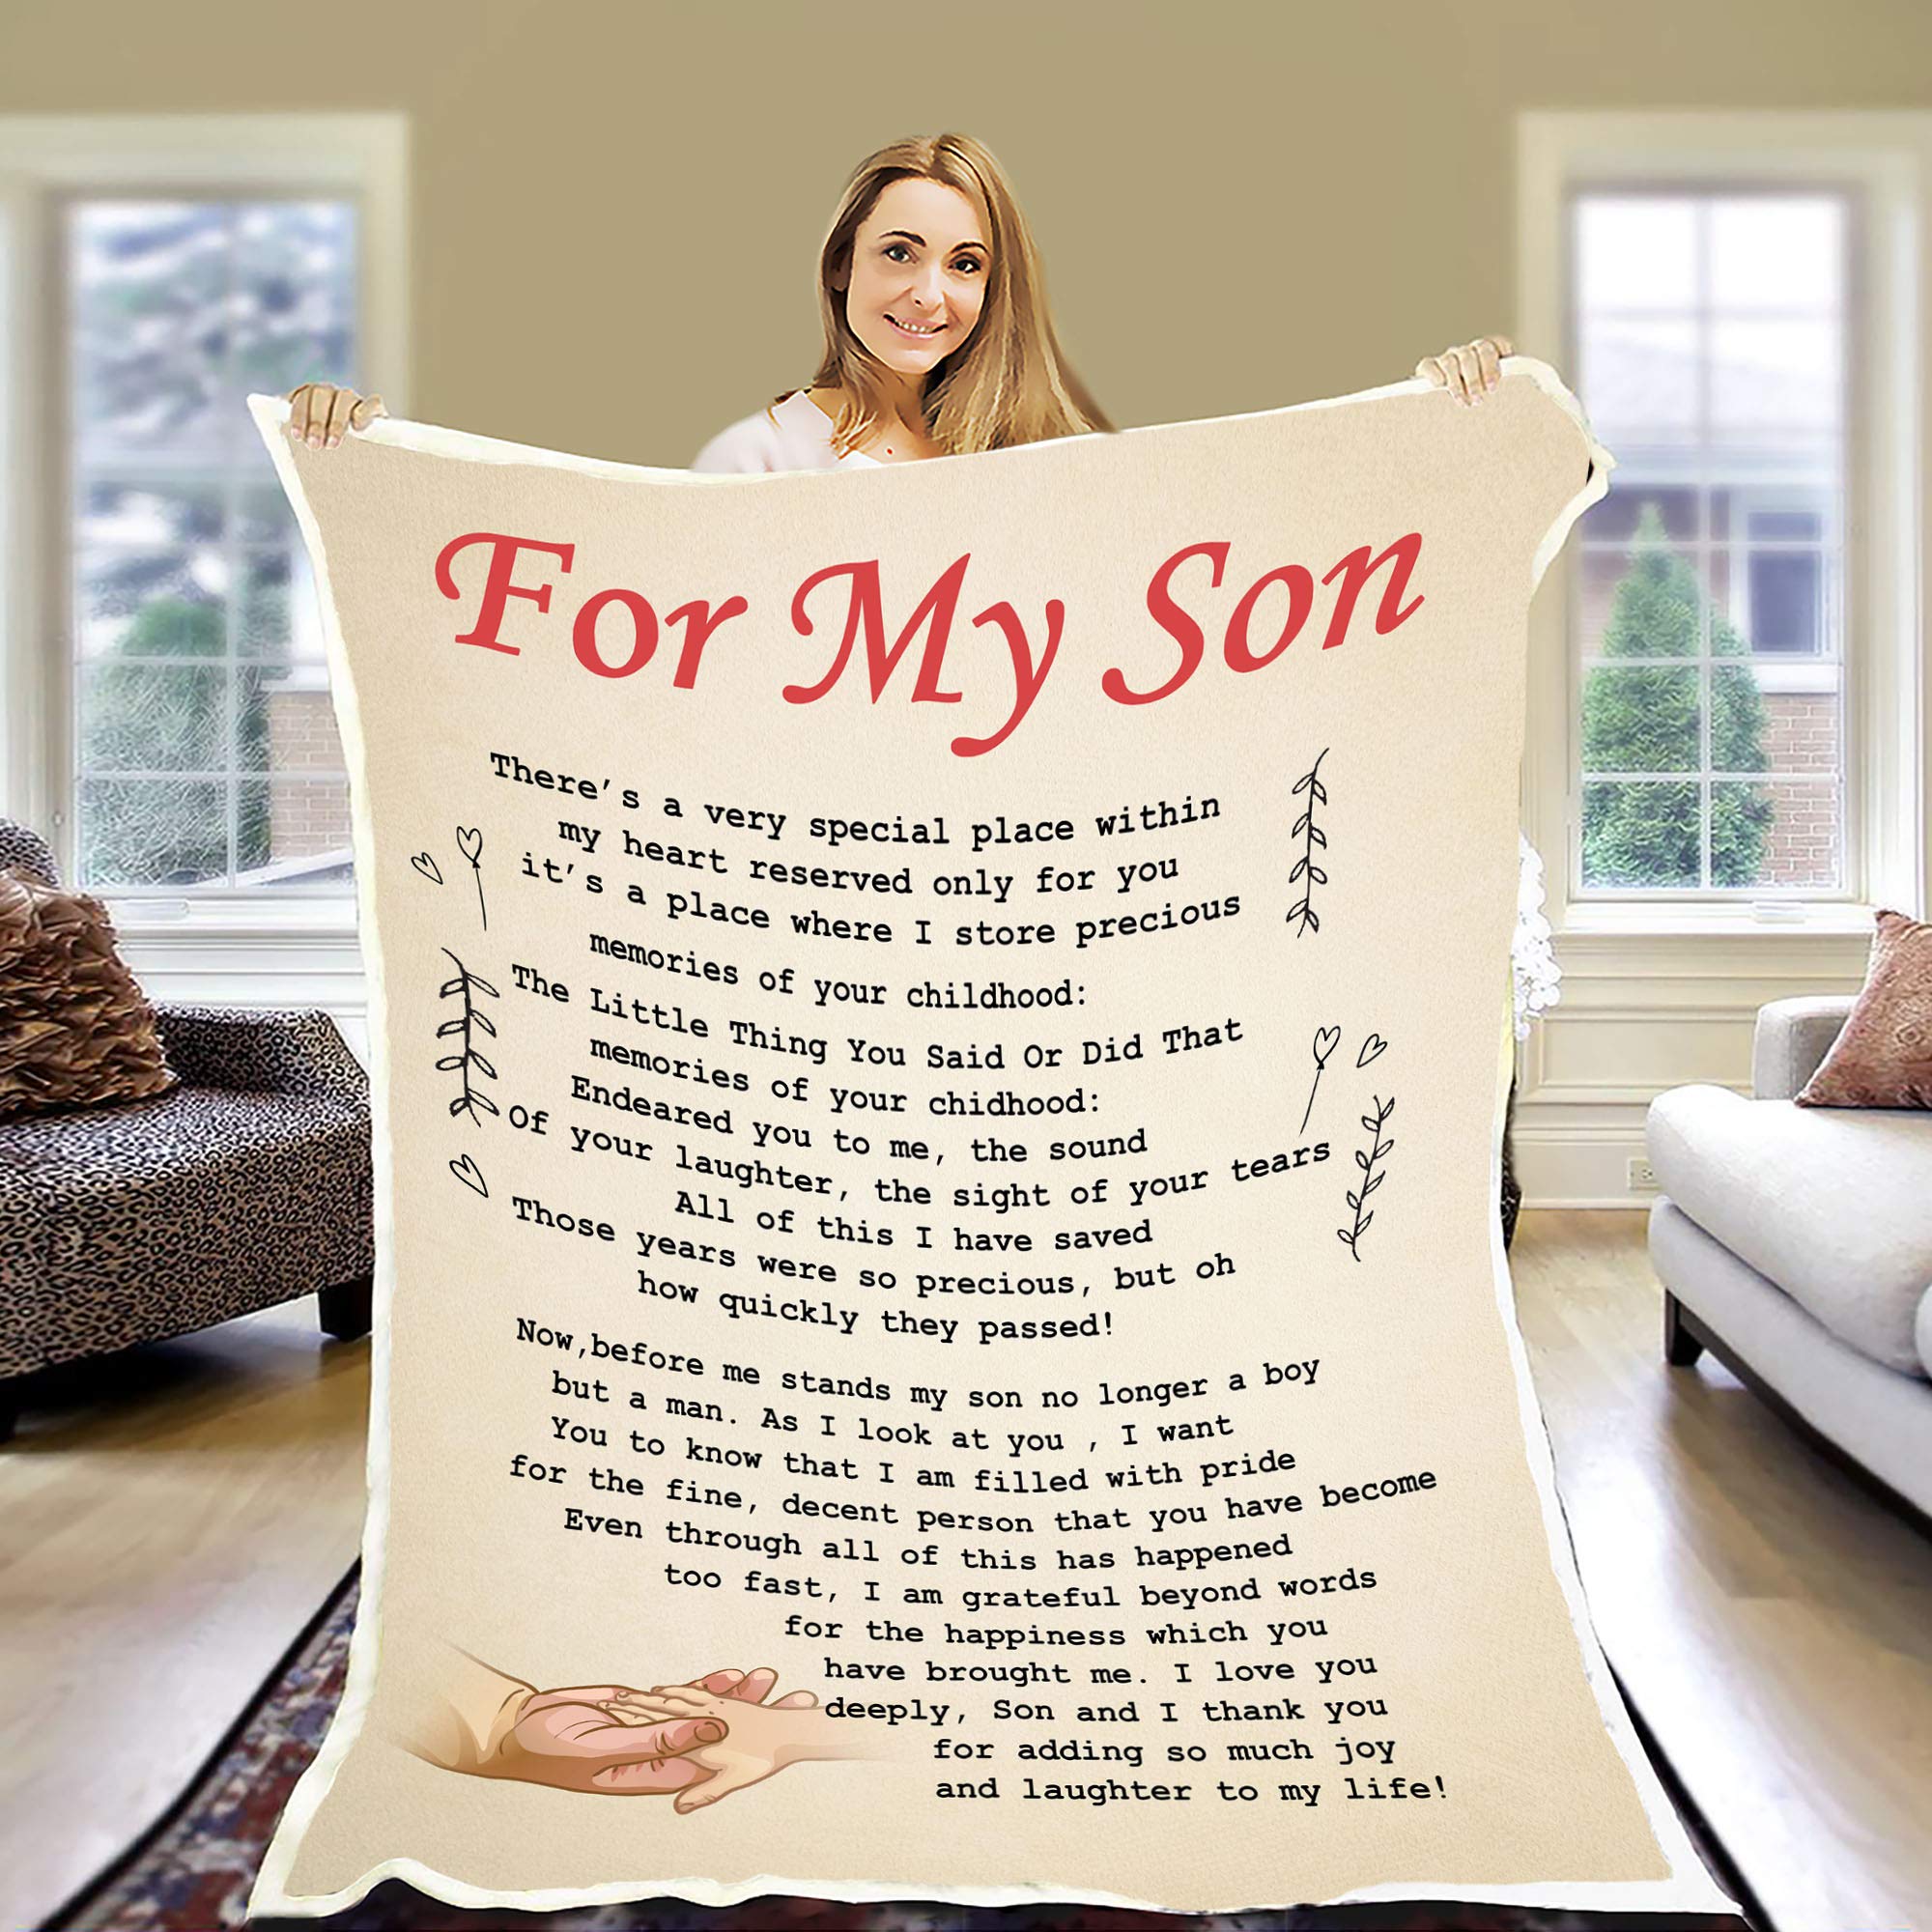 I Love You Deeply Son, and I Thank You, Premium Quality Blankets for Son with Quotes, Birthday, Son's Day Gift, Christmas Day, Children's D...